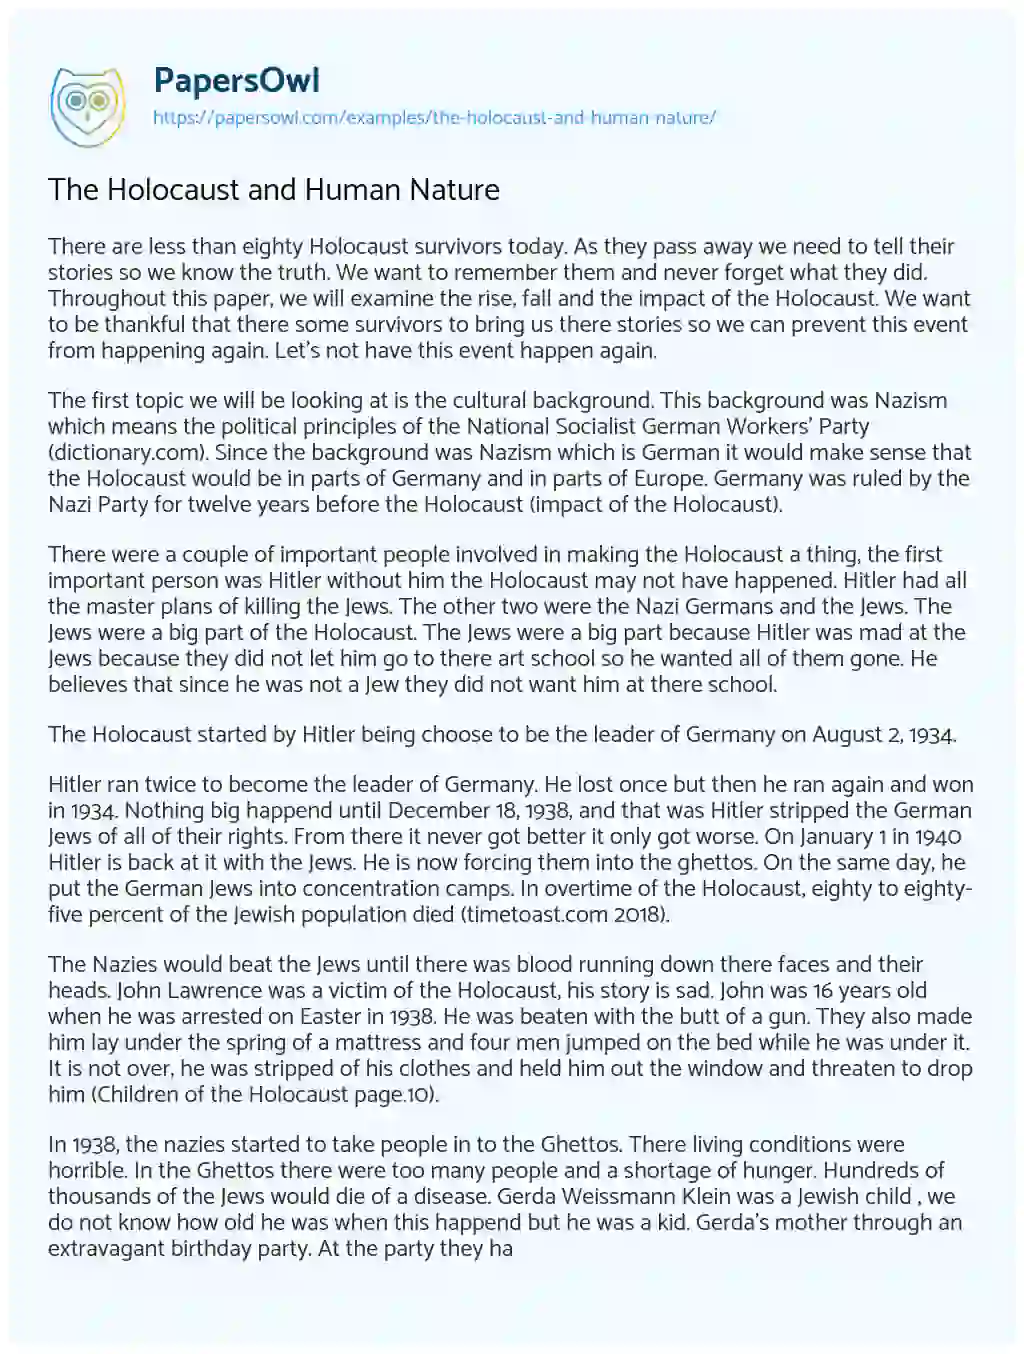 Essay on The Holocaust and Human Nature